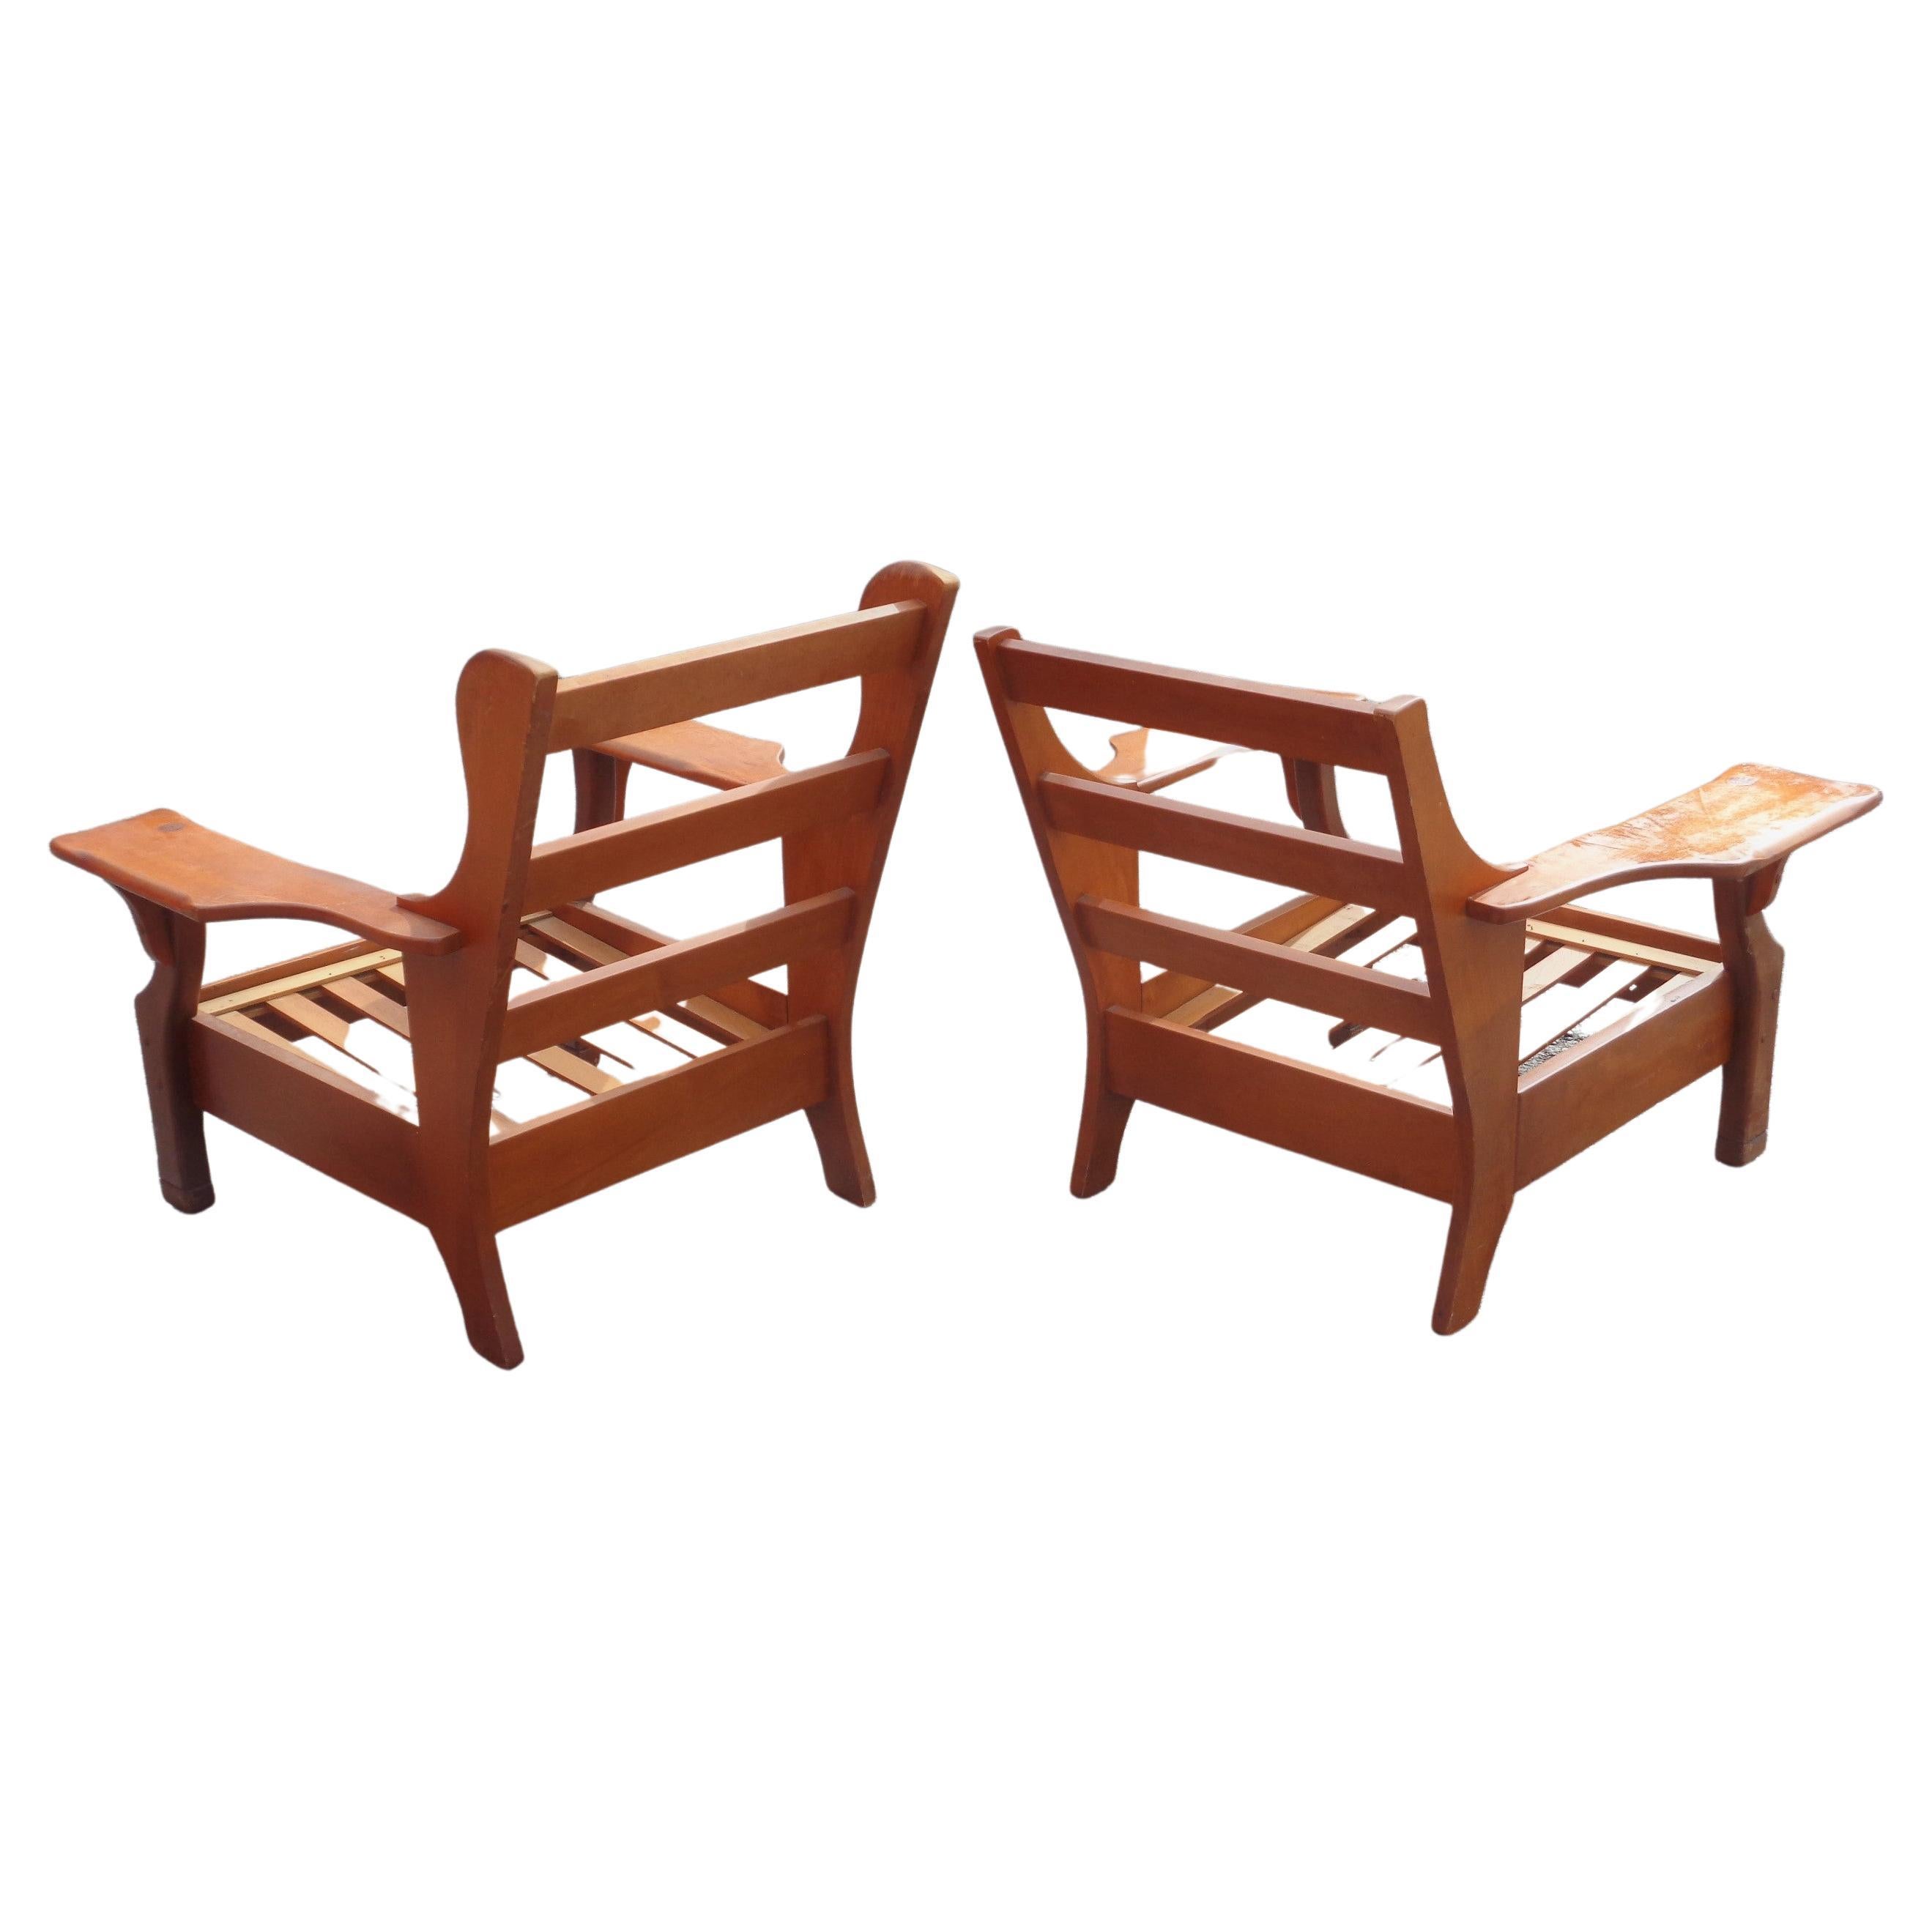 Mid-20th Century Rustic Paddle Arm Lounge Chairs, circa 1940